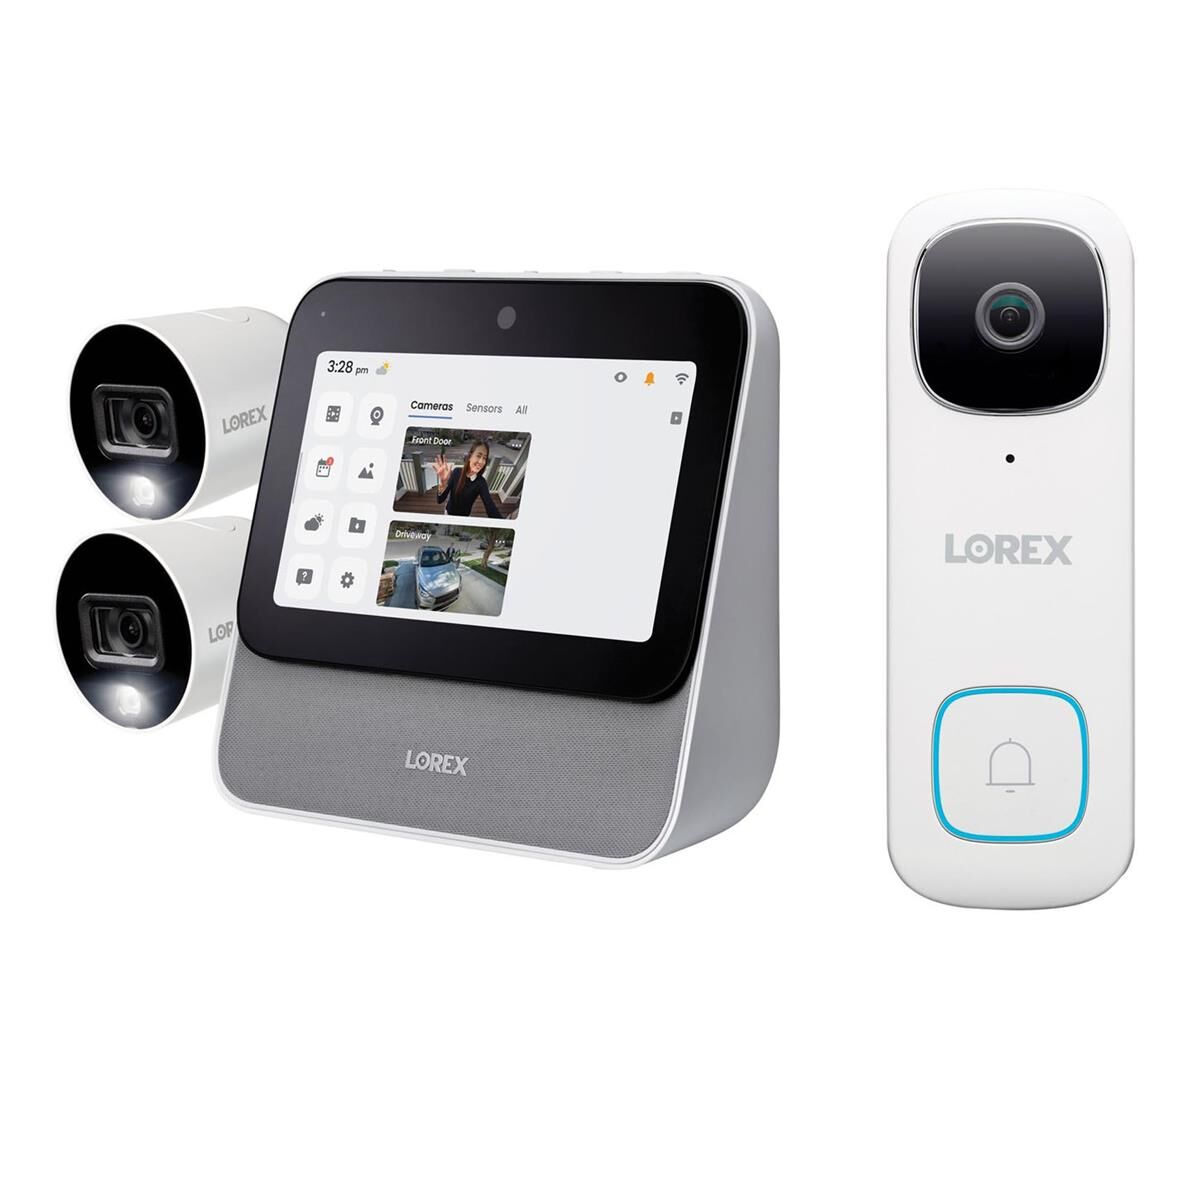 Lorex Smart Home Security Center, Bundle with Video Doorbell w/Person Detection